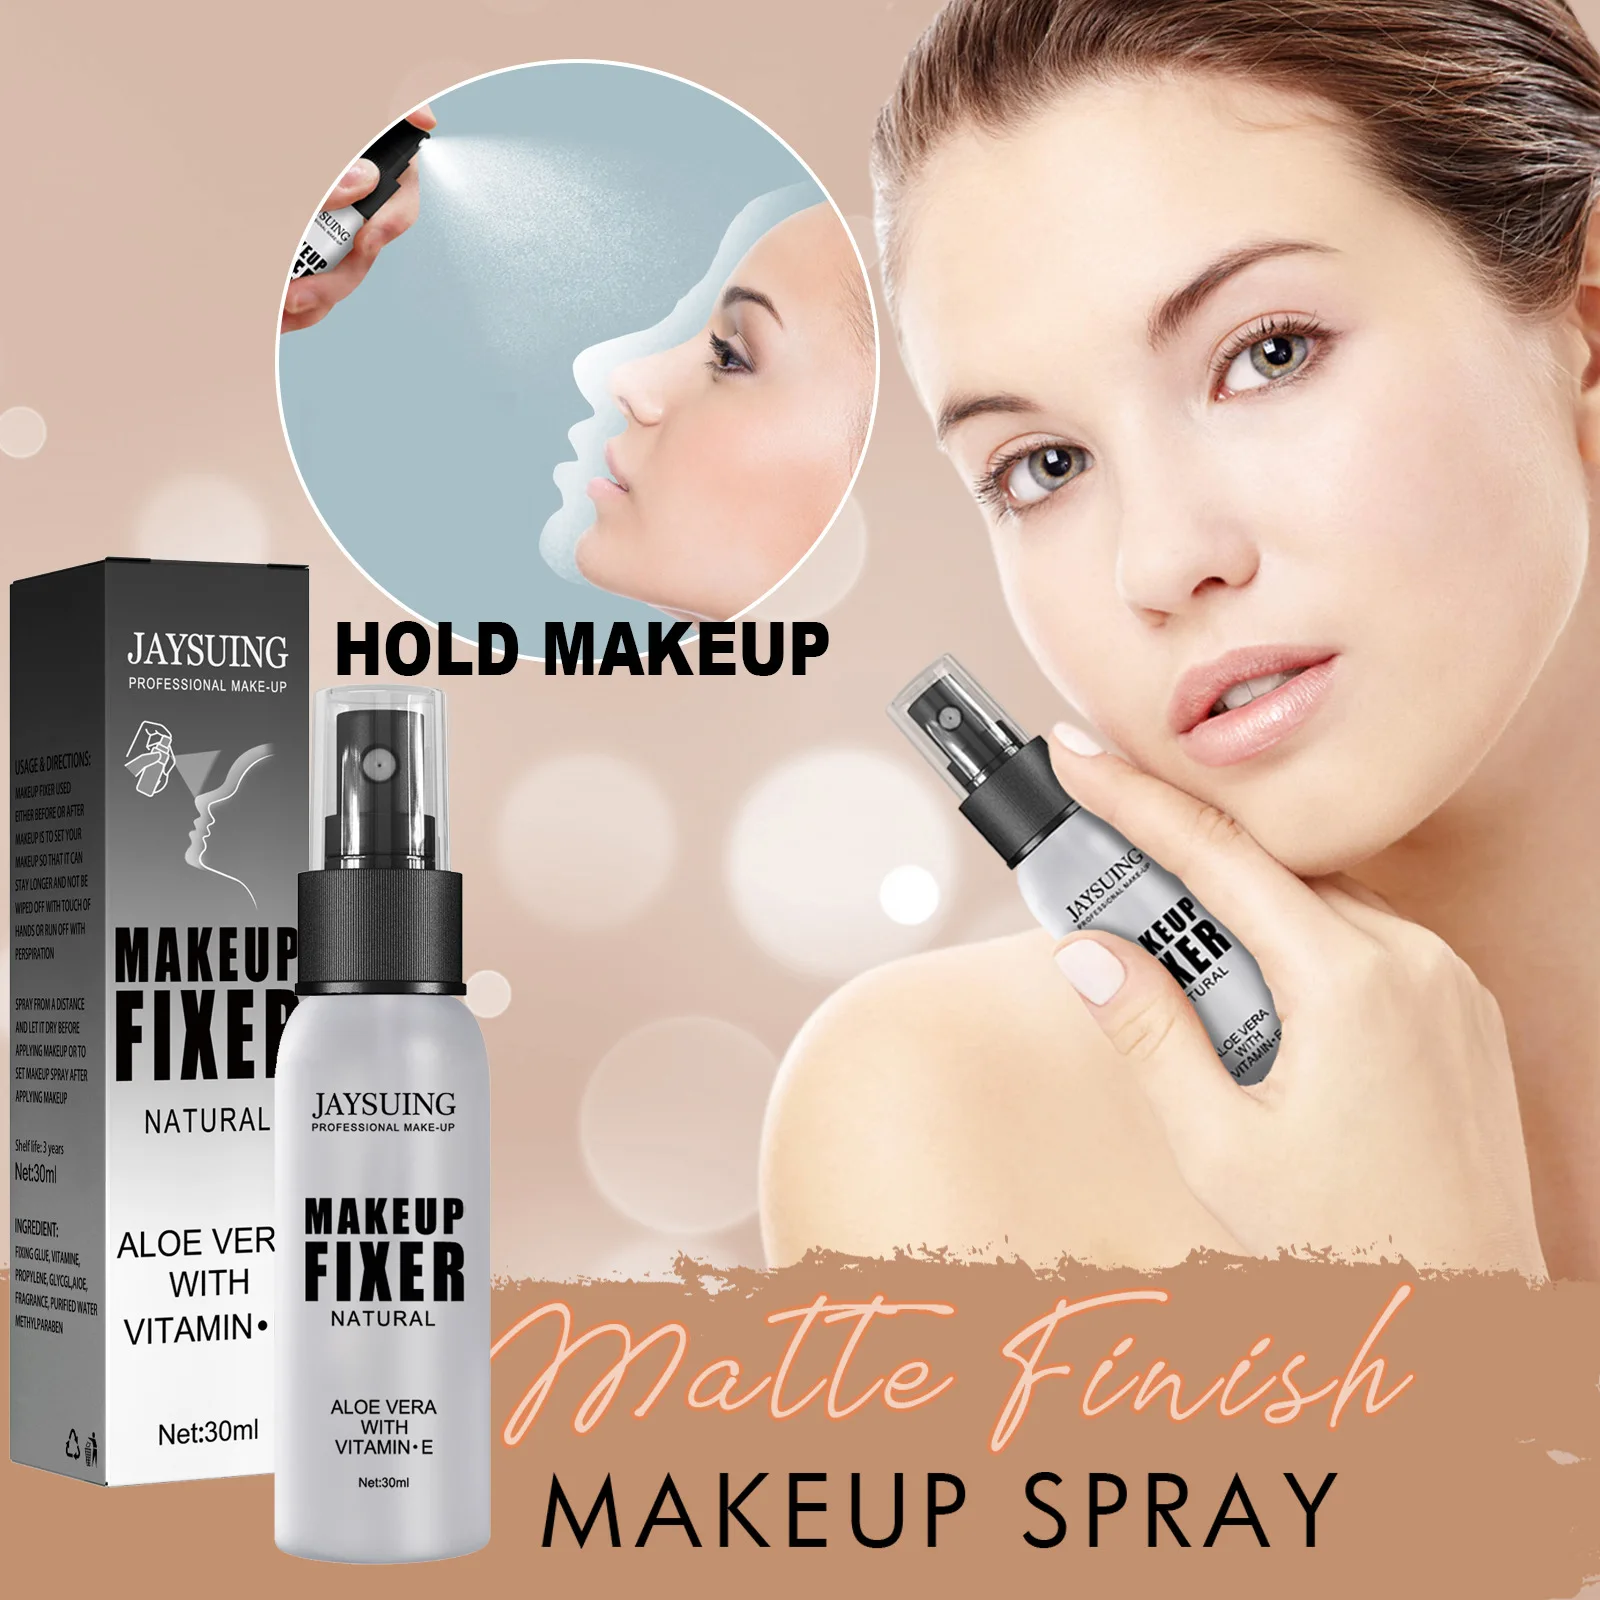 

Makeup Setting Spray Moisturizing Lotion Hydrate Long-lasting Make Up Oil Control Natural Matte Refreshing Quick Fixer Cosmetics